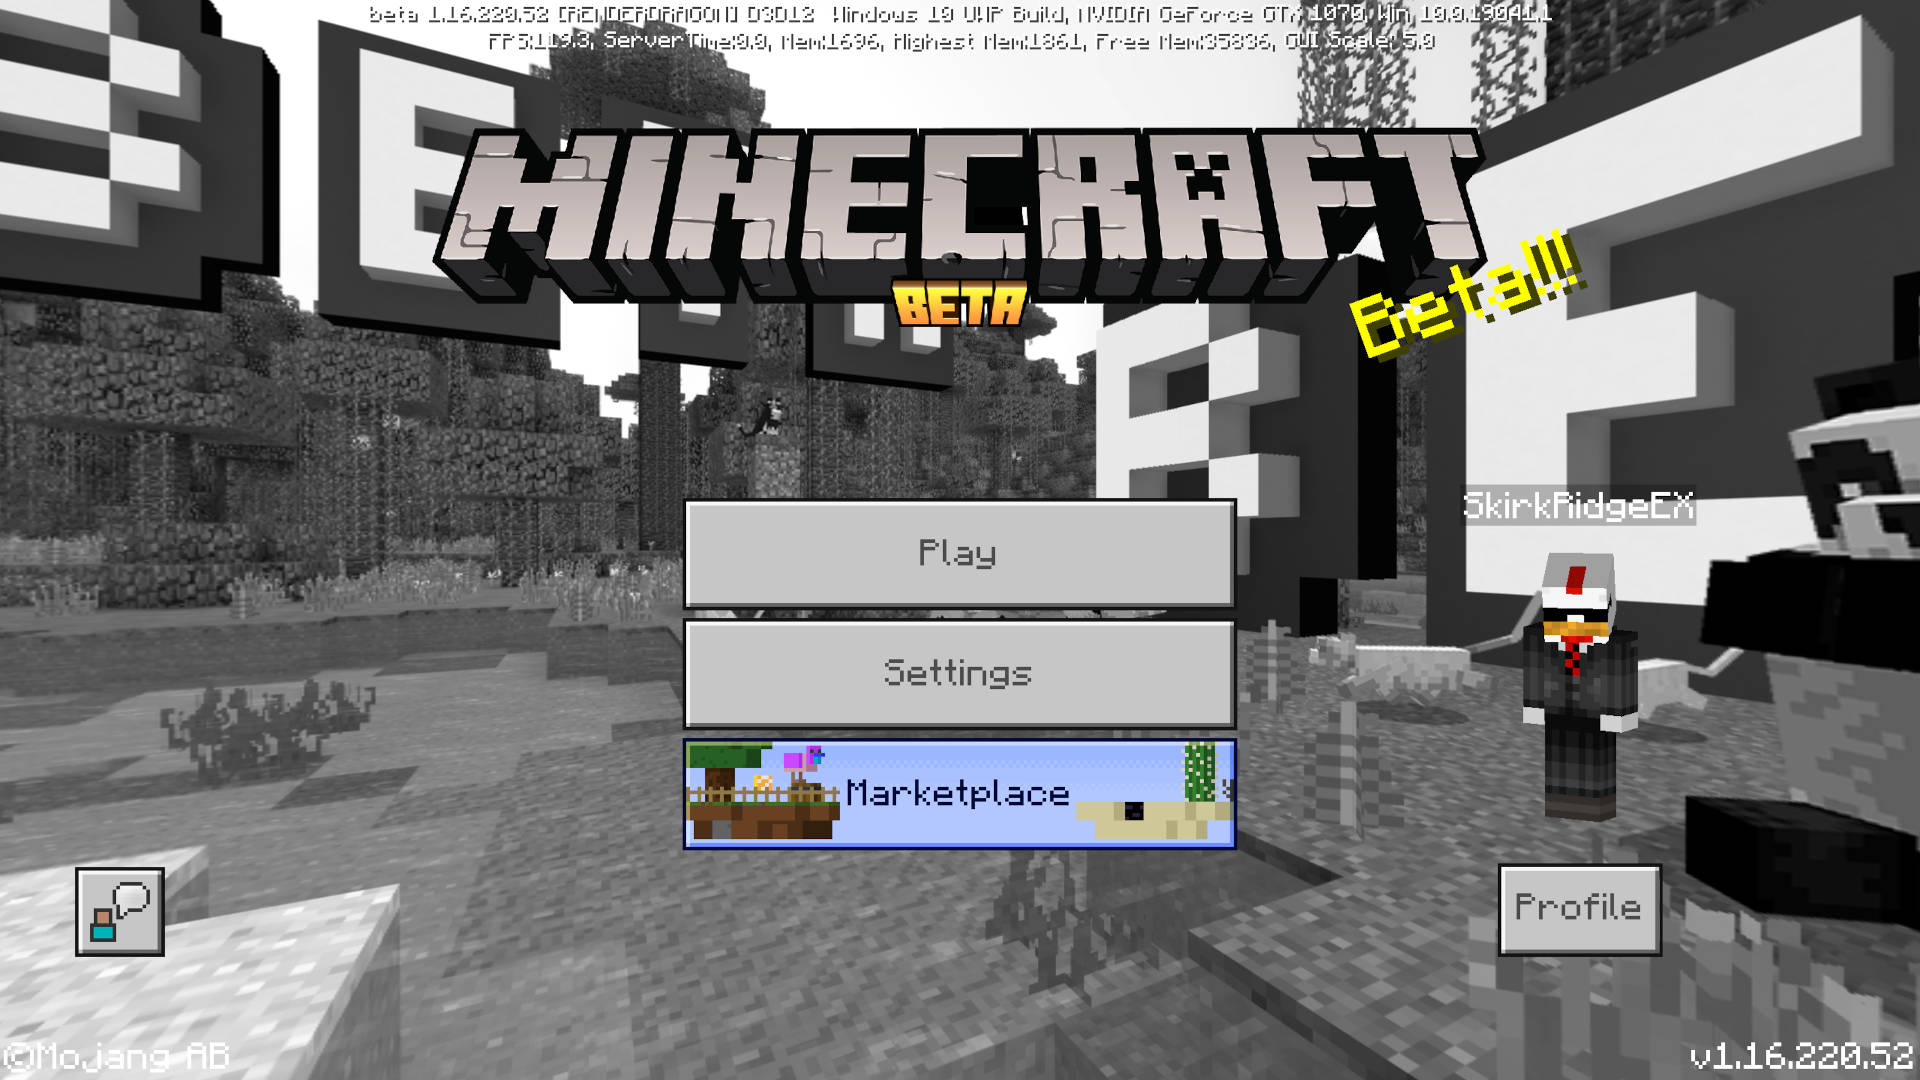 The Minecraft beta version main menu has a monochrome image of the game world.